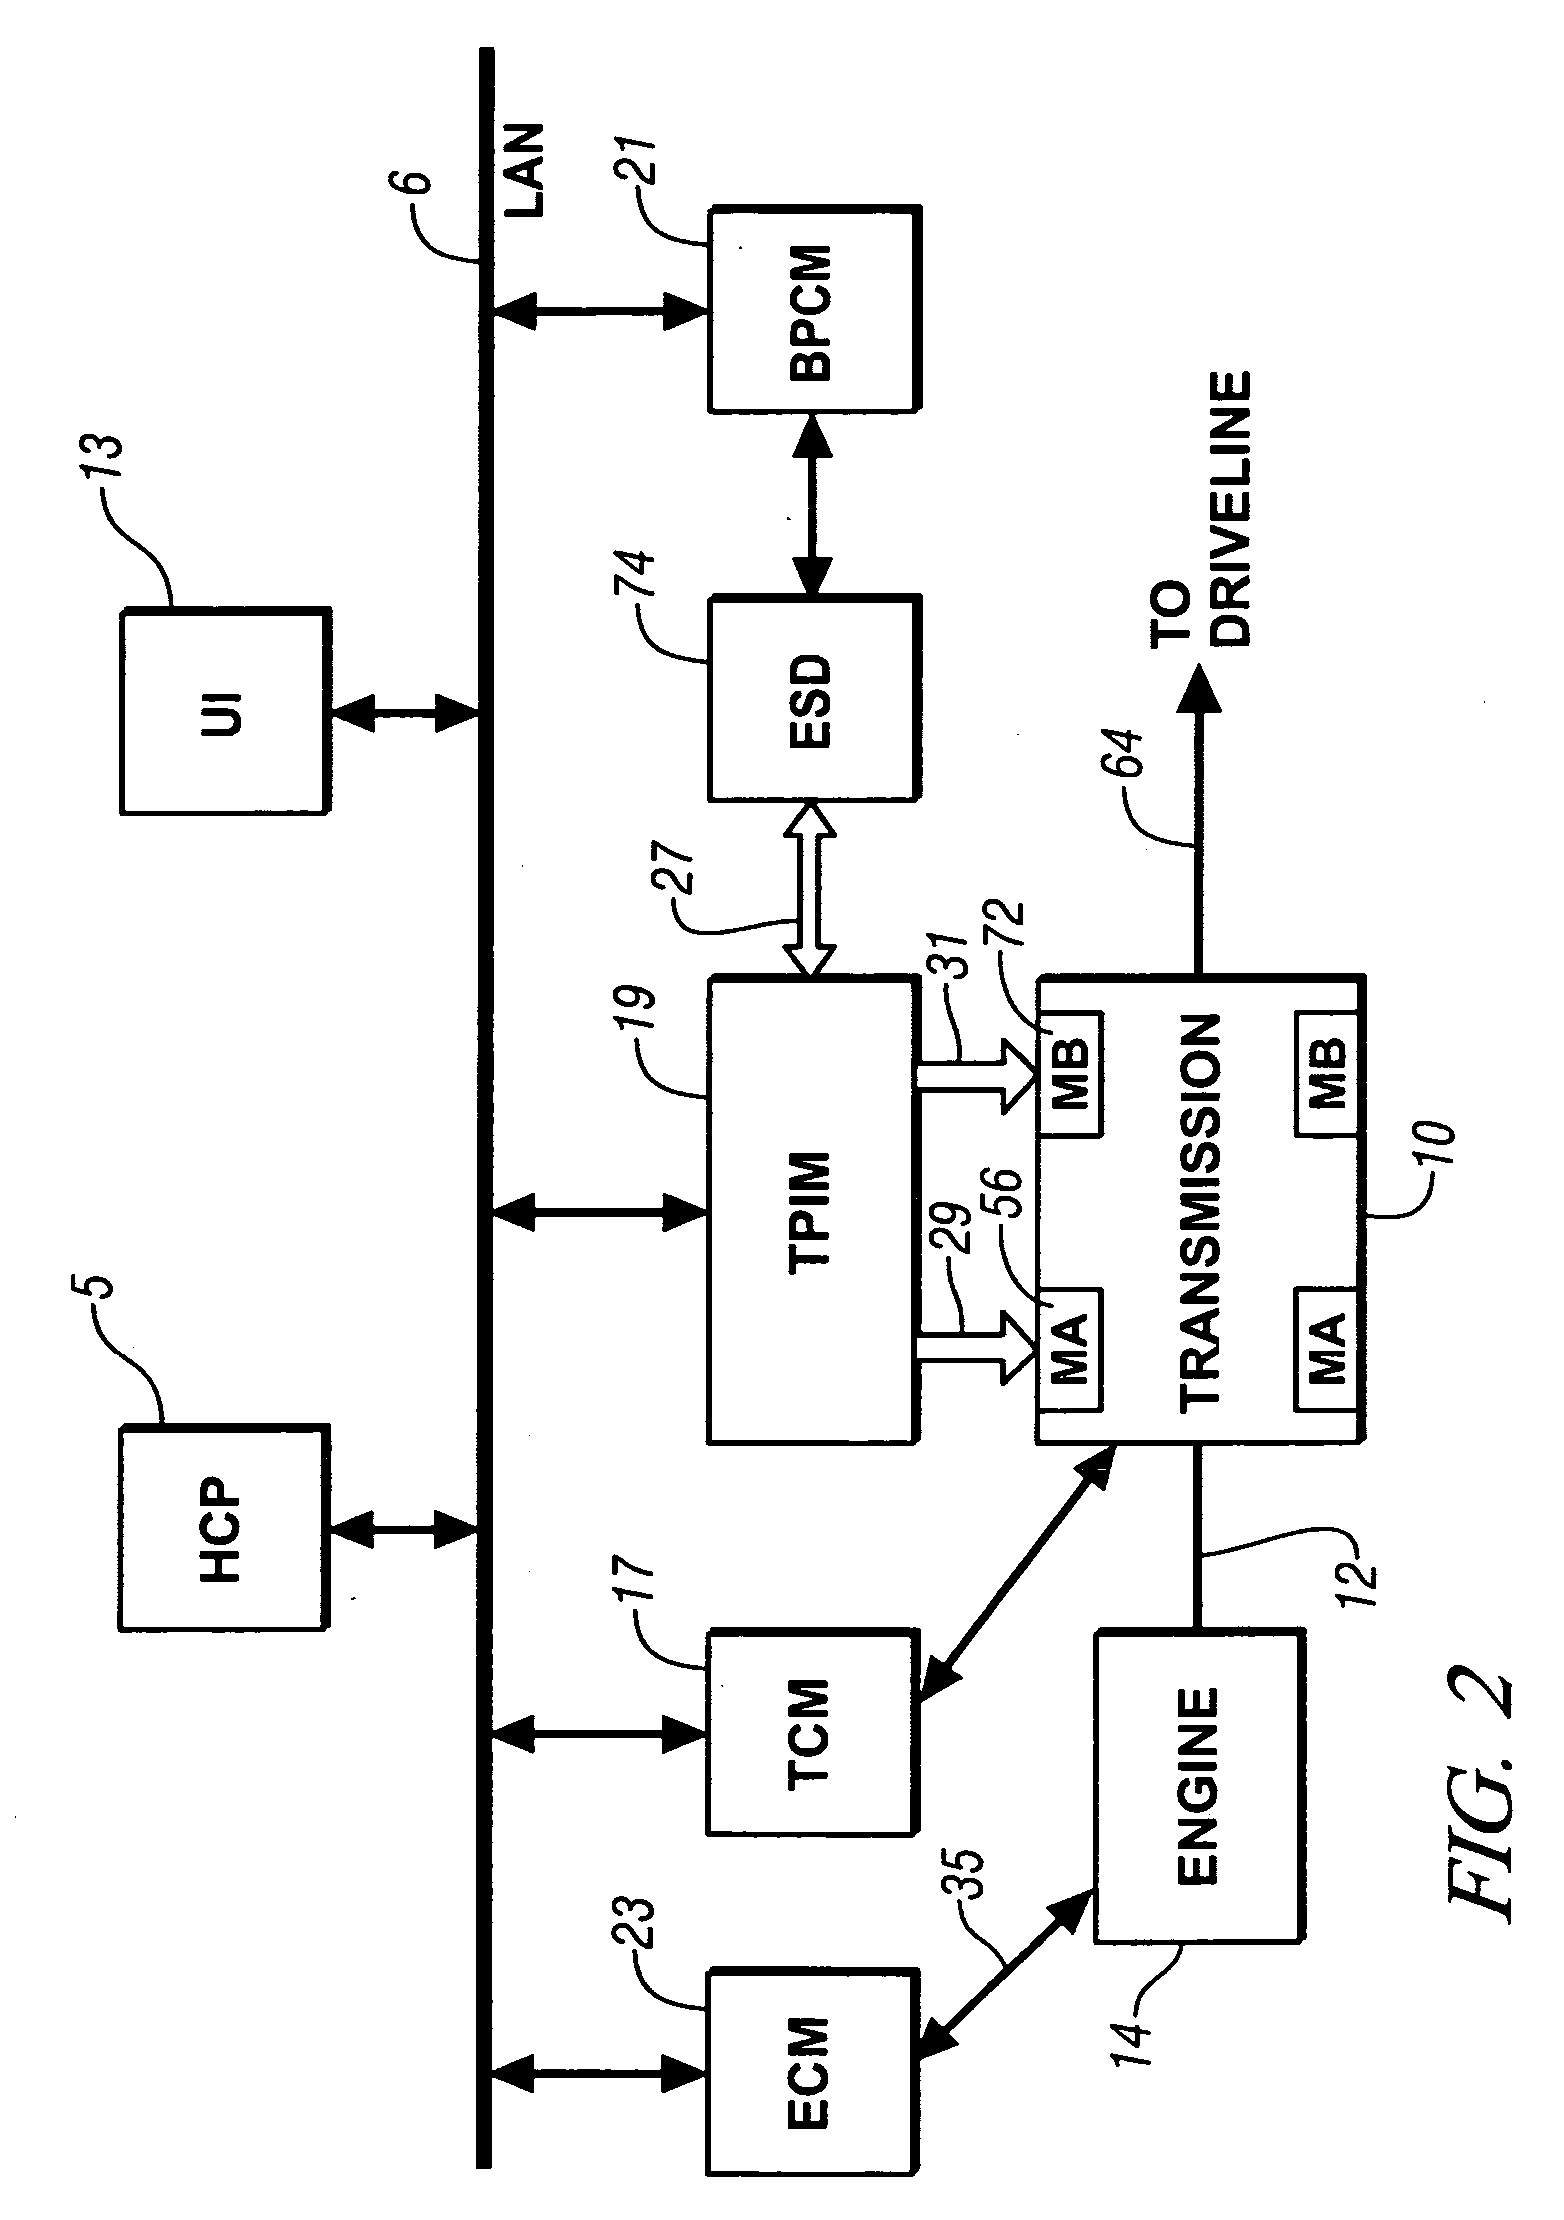 Synchronous shift execution for hybrid transmission